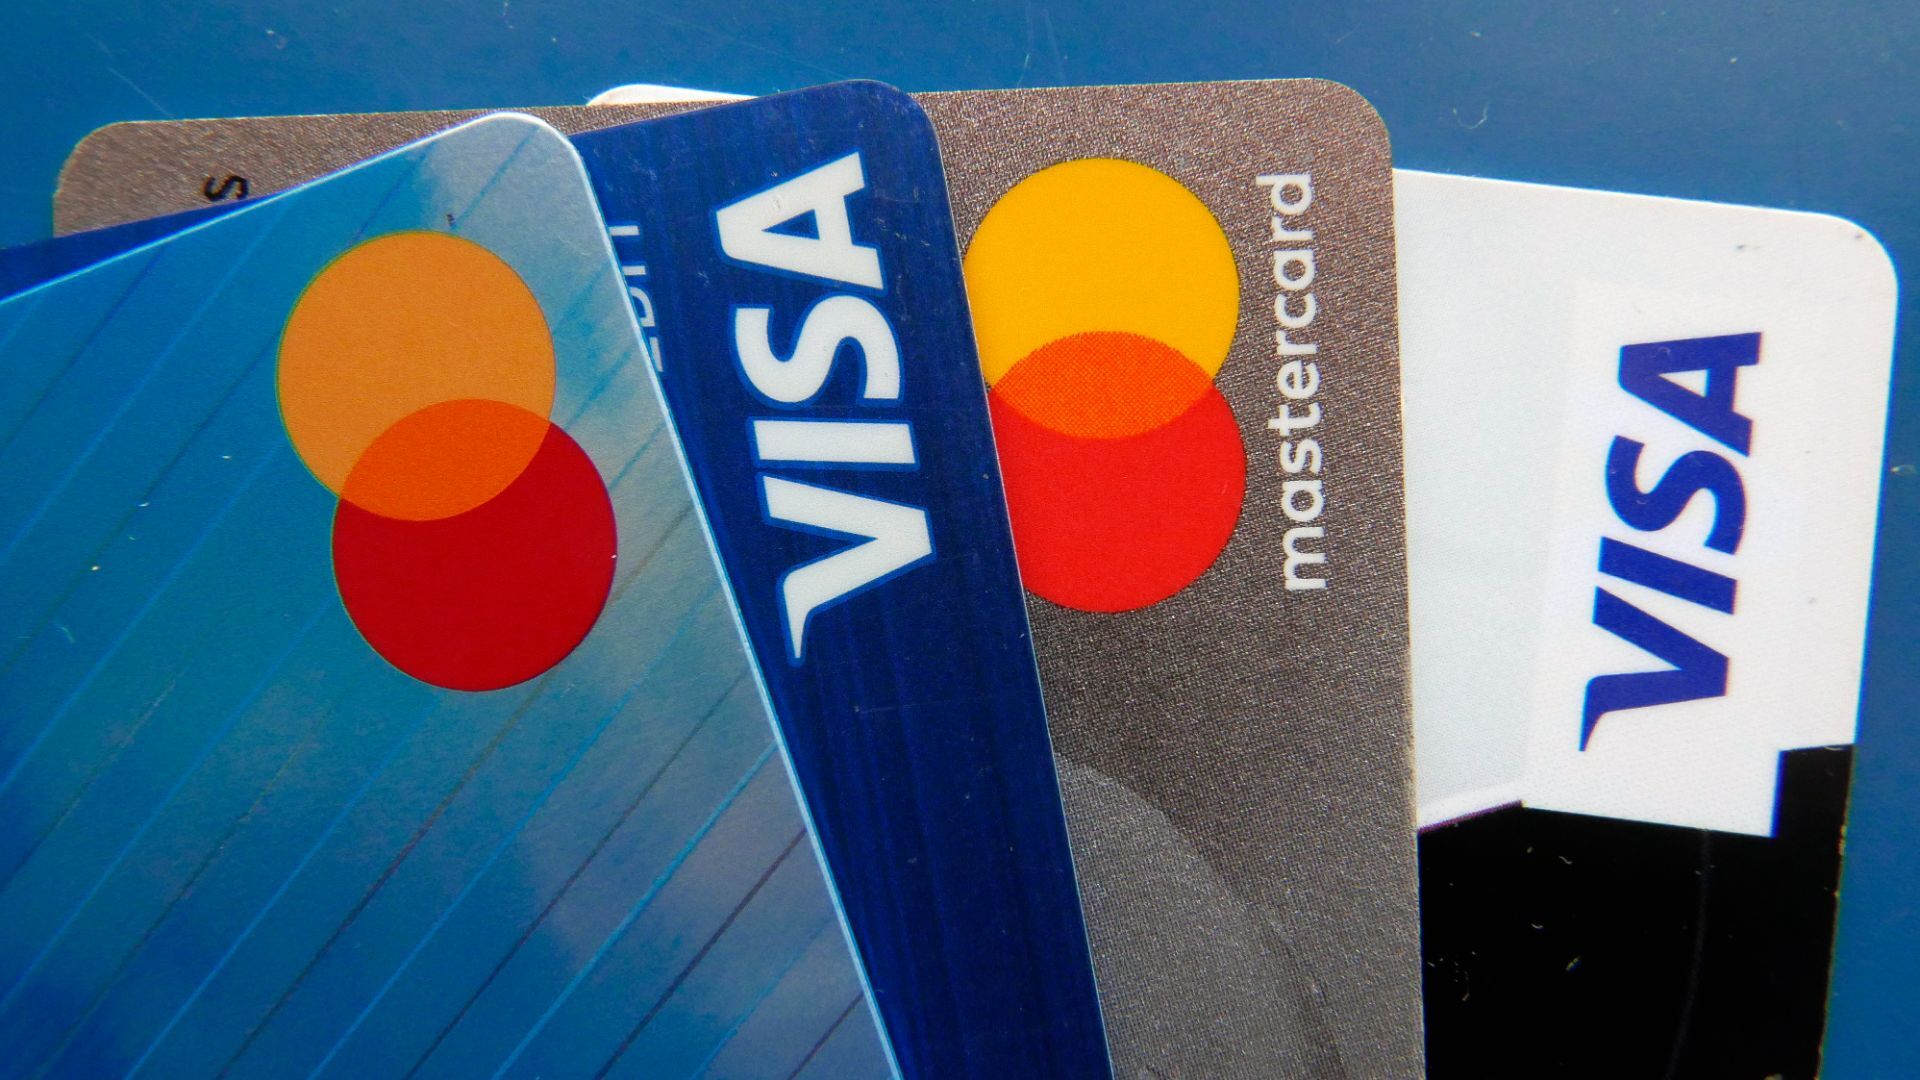 Credit card purchases: The bill will be higher almost everywhere in Canada